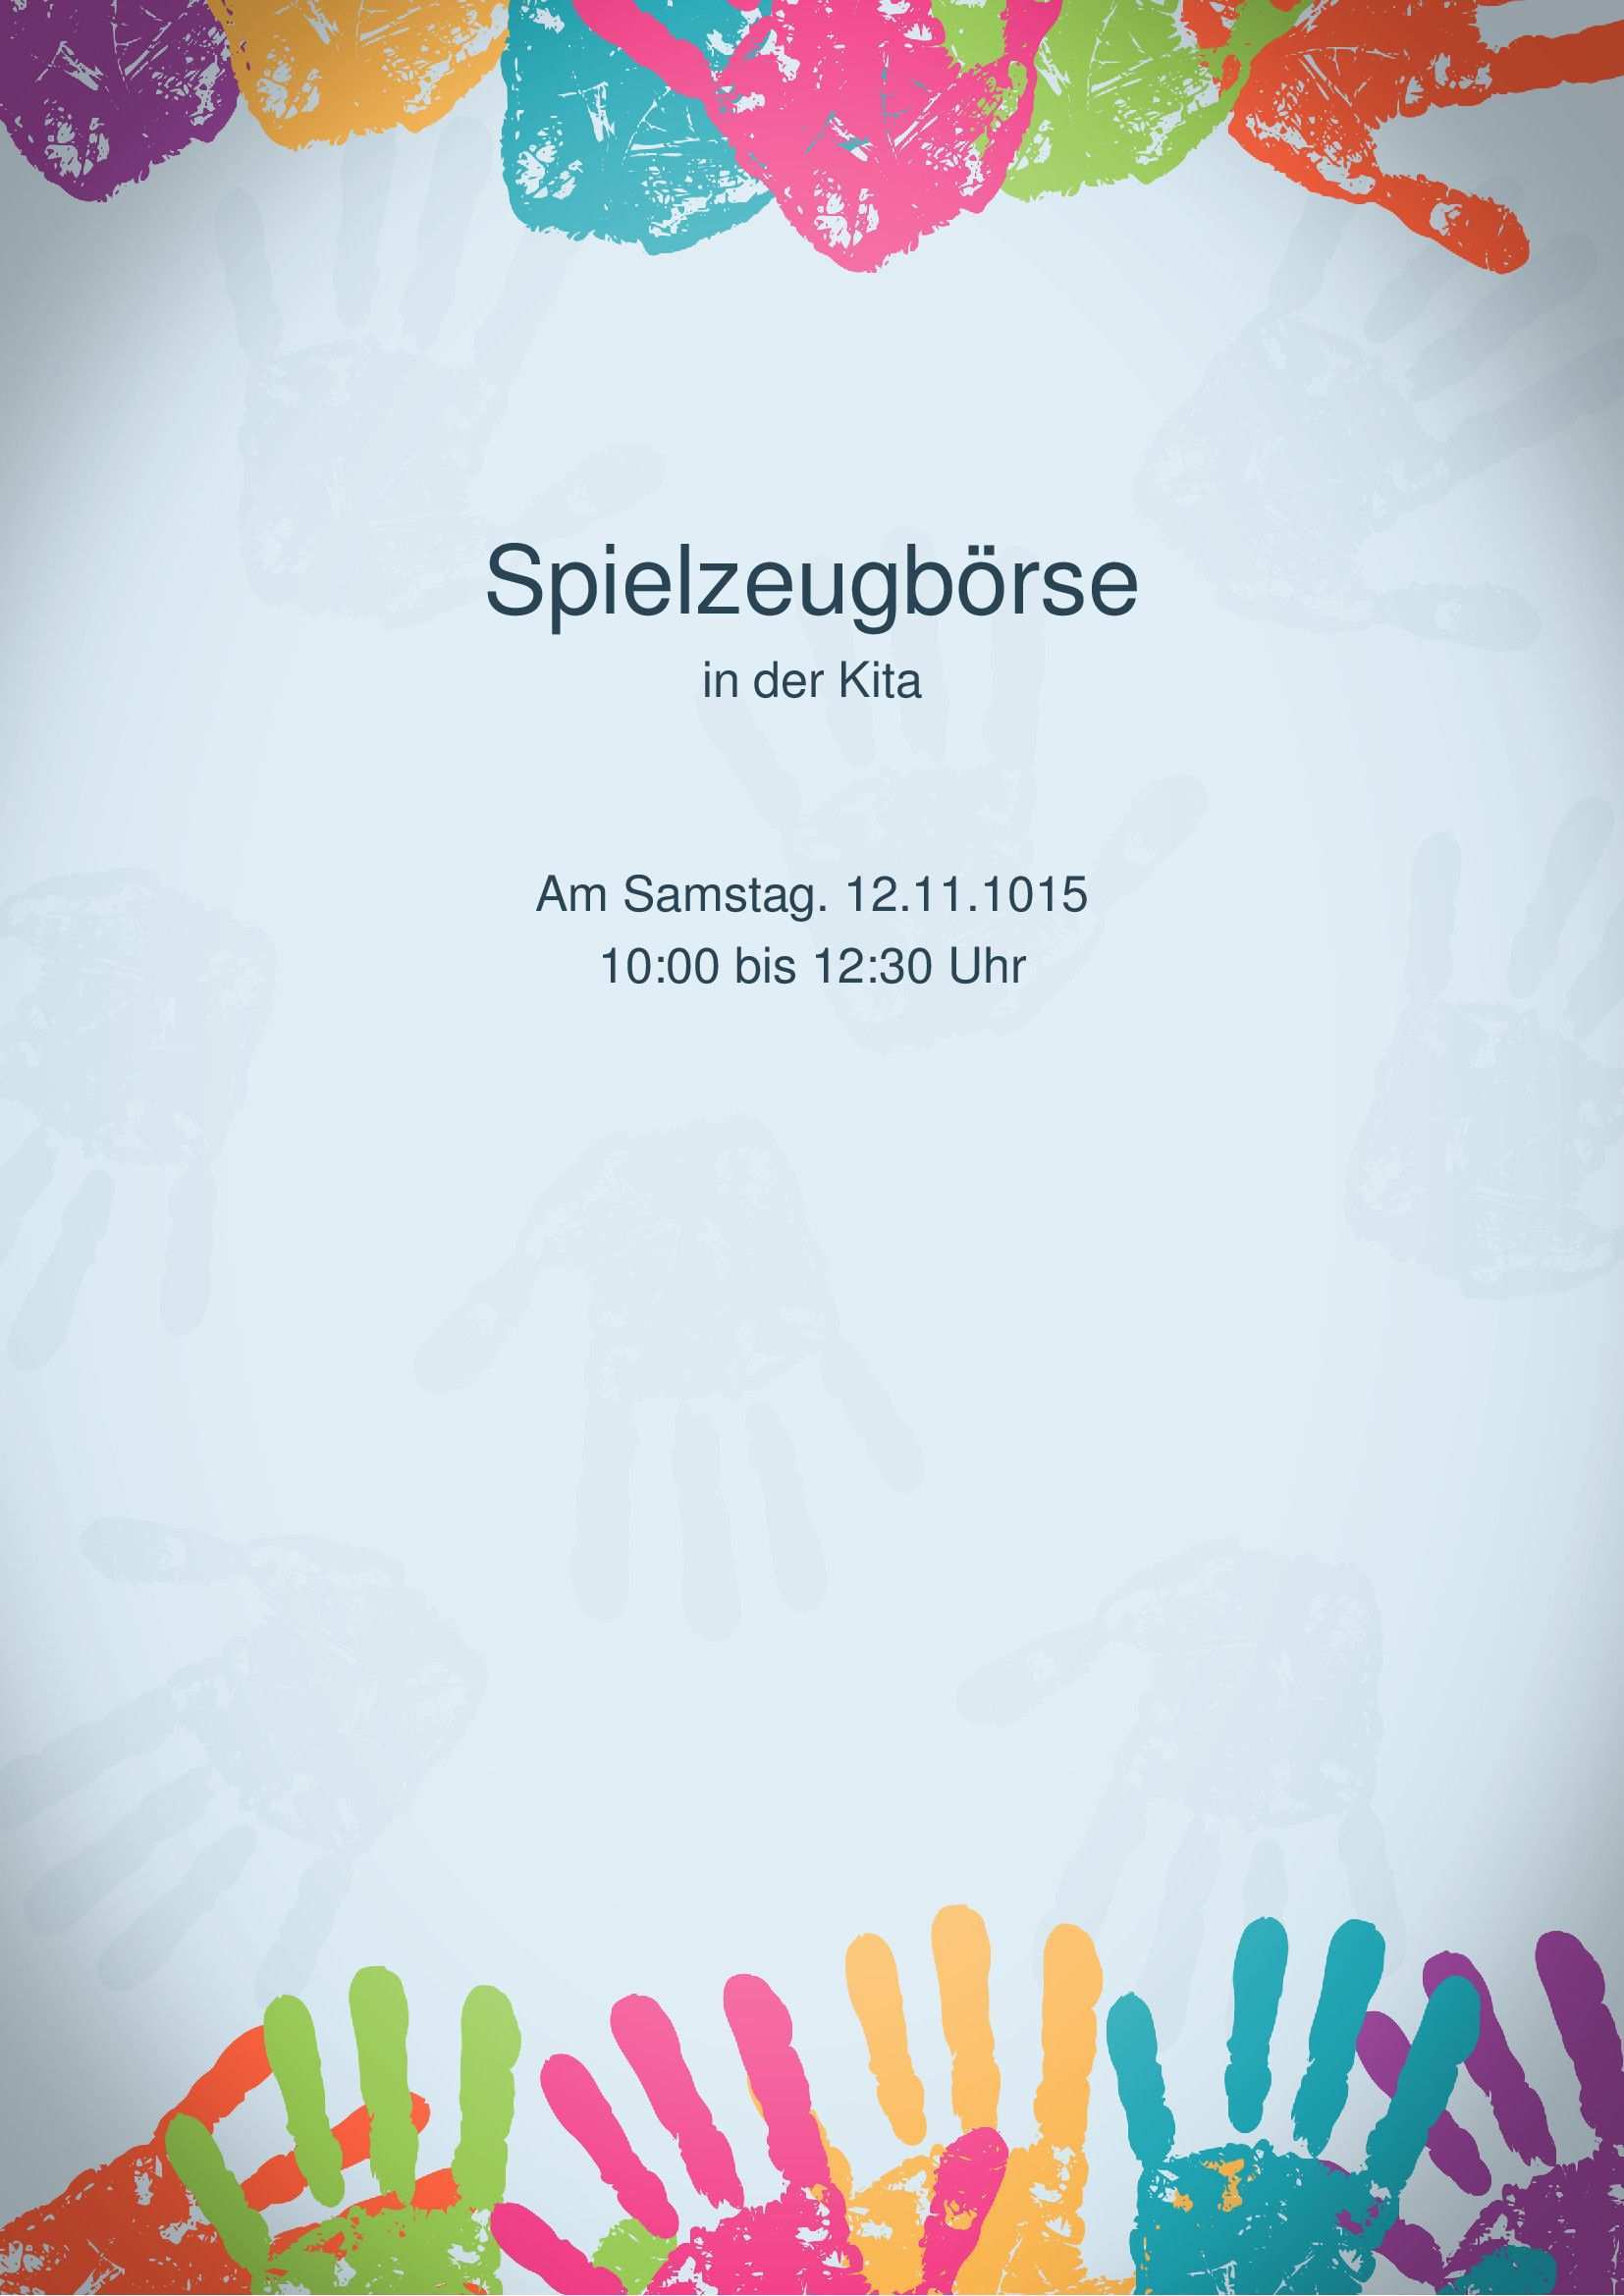 Spielzeugboerse By Delta On 365layouts Flyer Template Free Templates